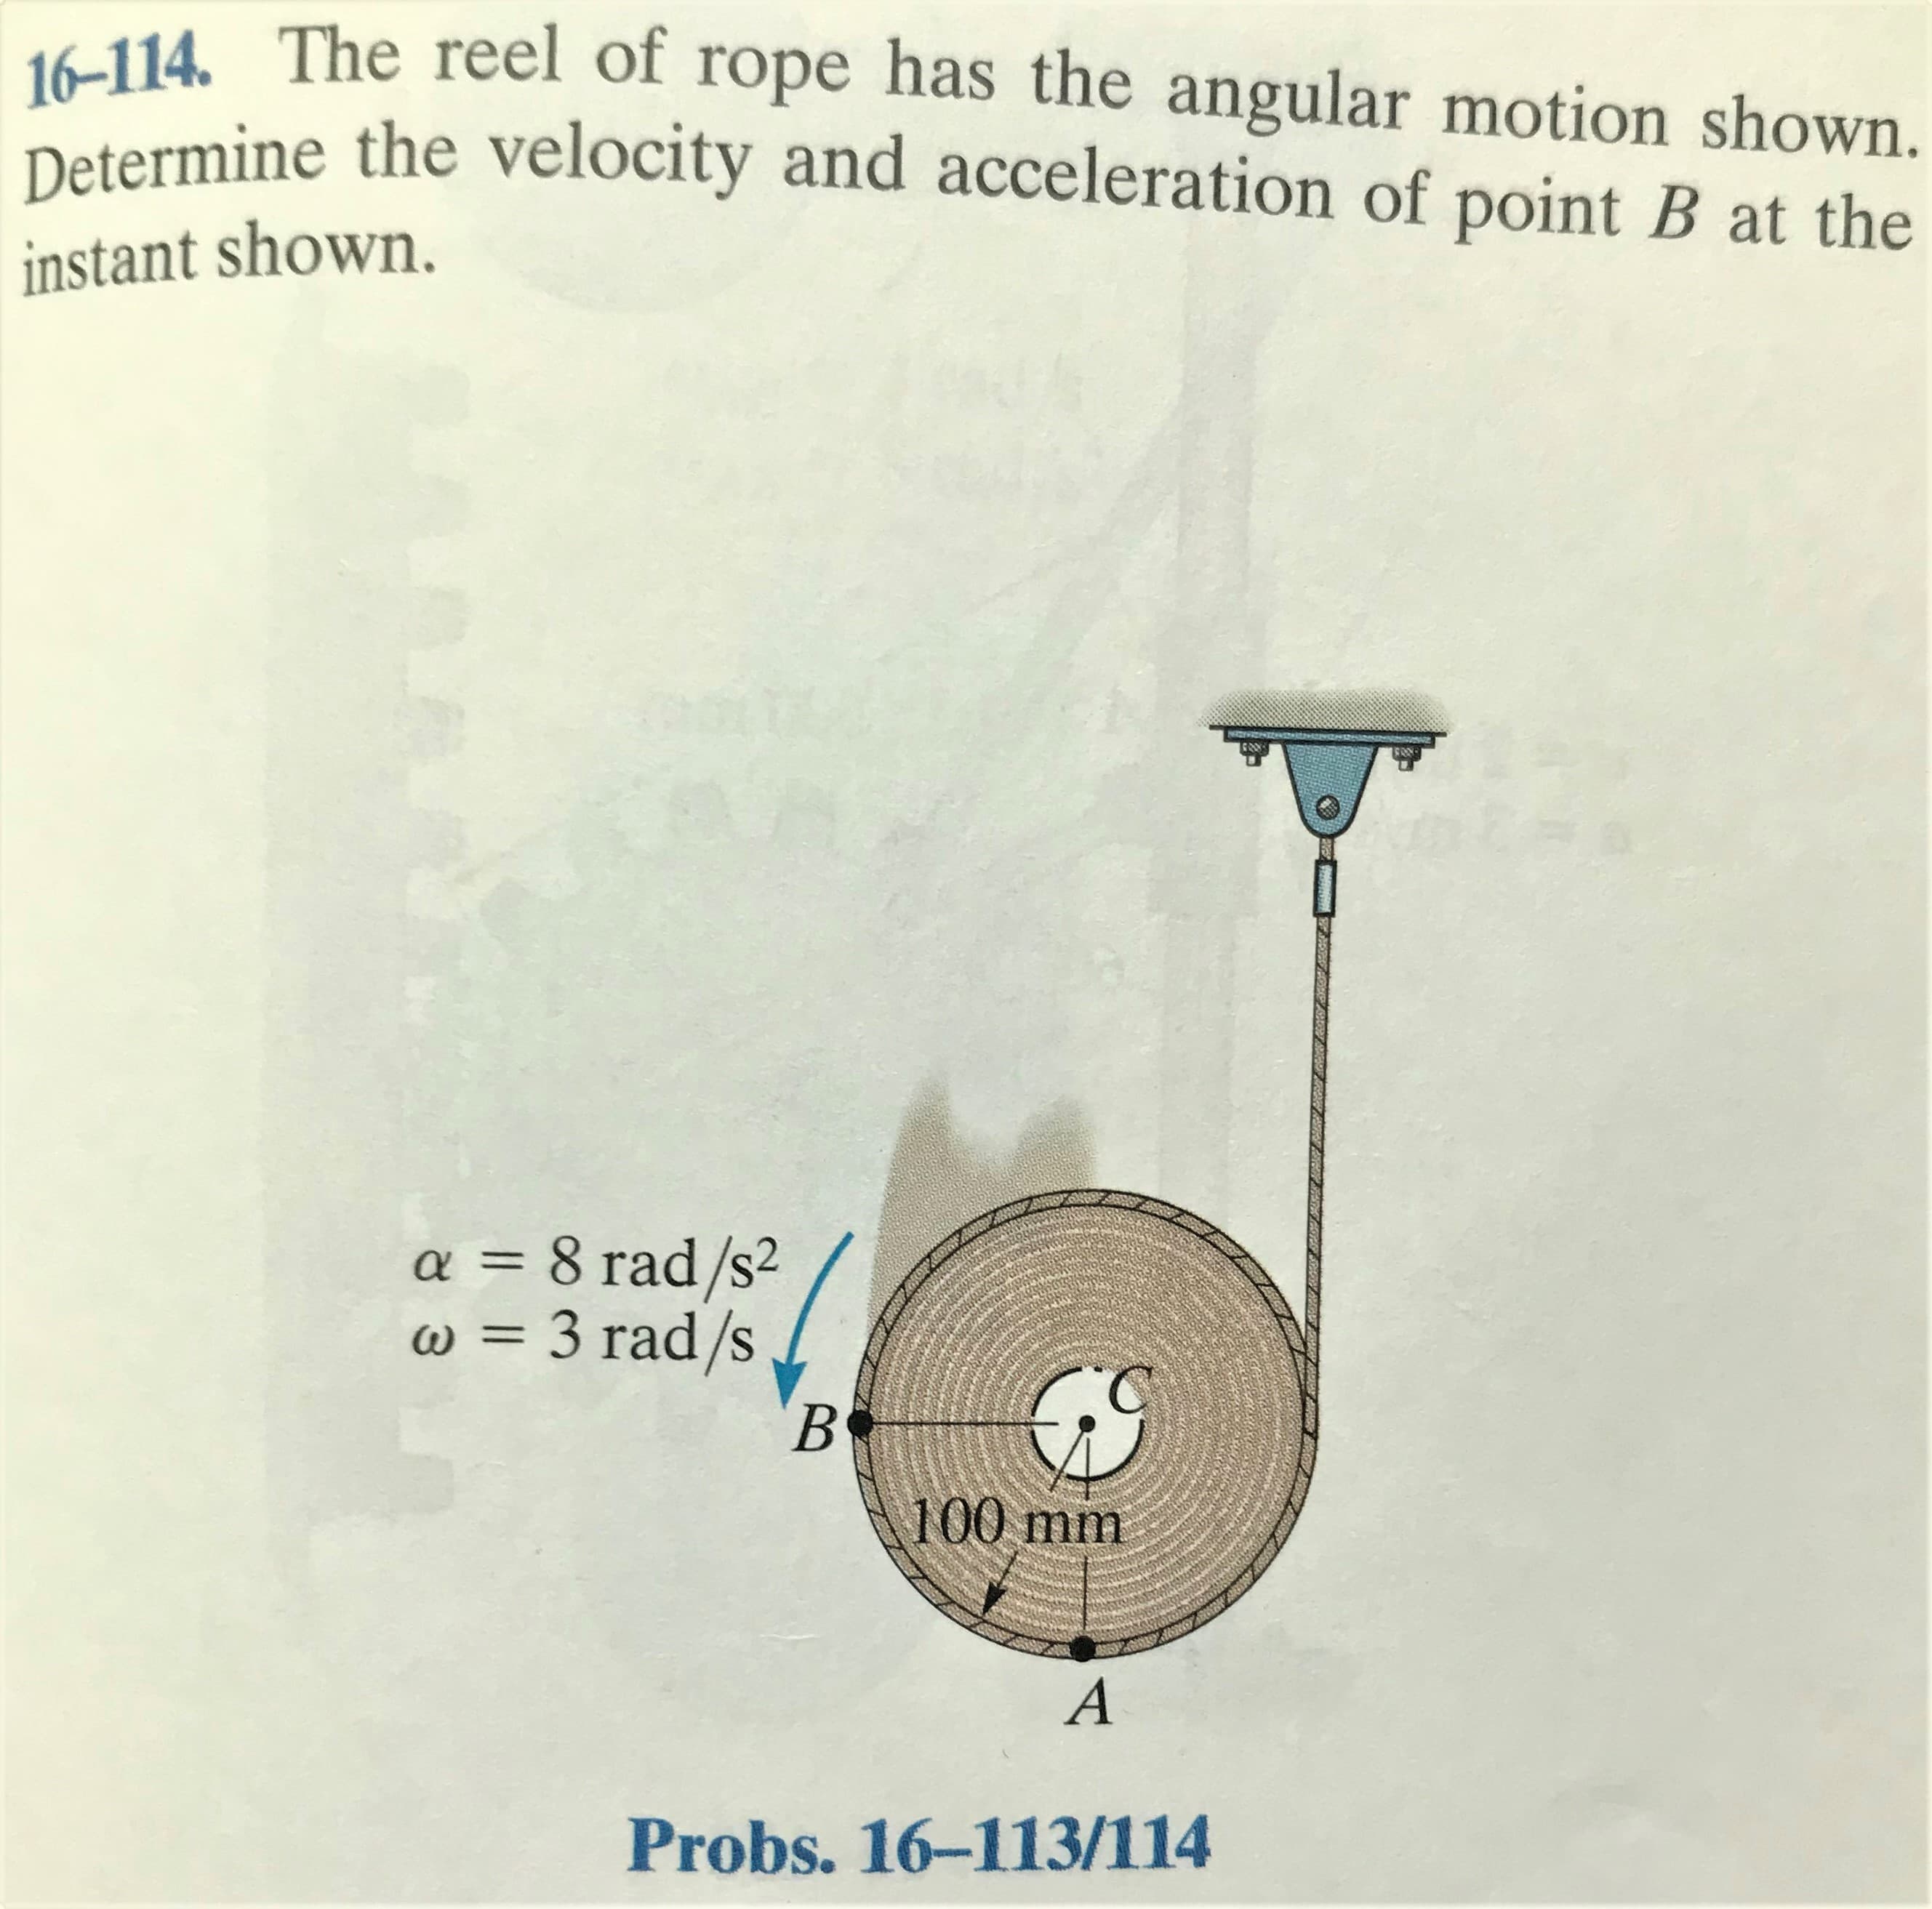 16-114. The reel of rope has the angular motion shown.
Determine the velocity and acceleration of point B at the
instant shown.
a = 8 rad/s²
w = 3 rad/s
100 mm
A
Probs. 16-113/114
